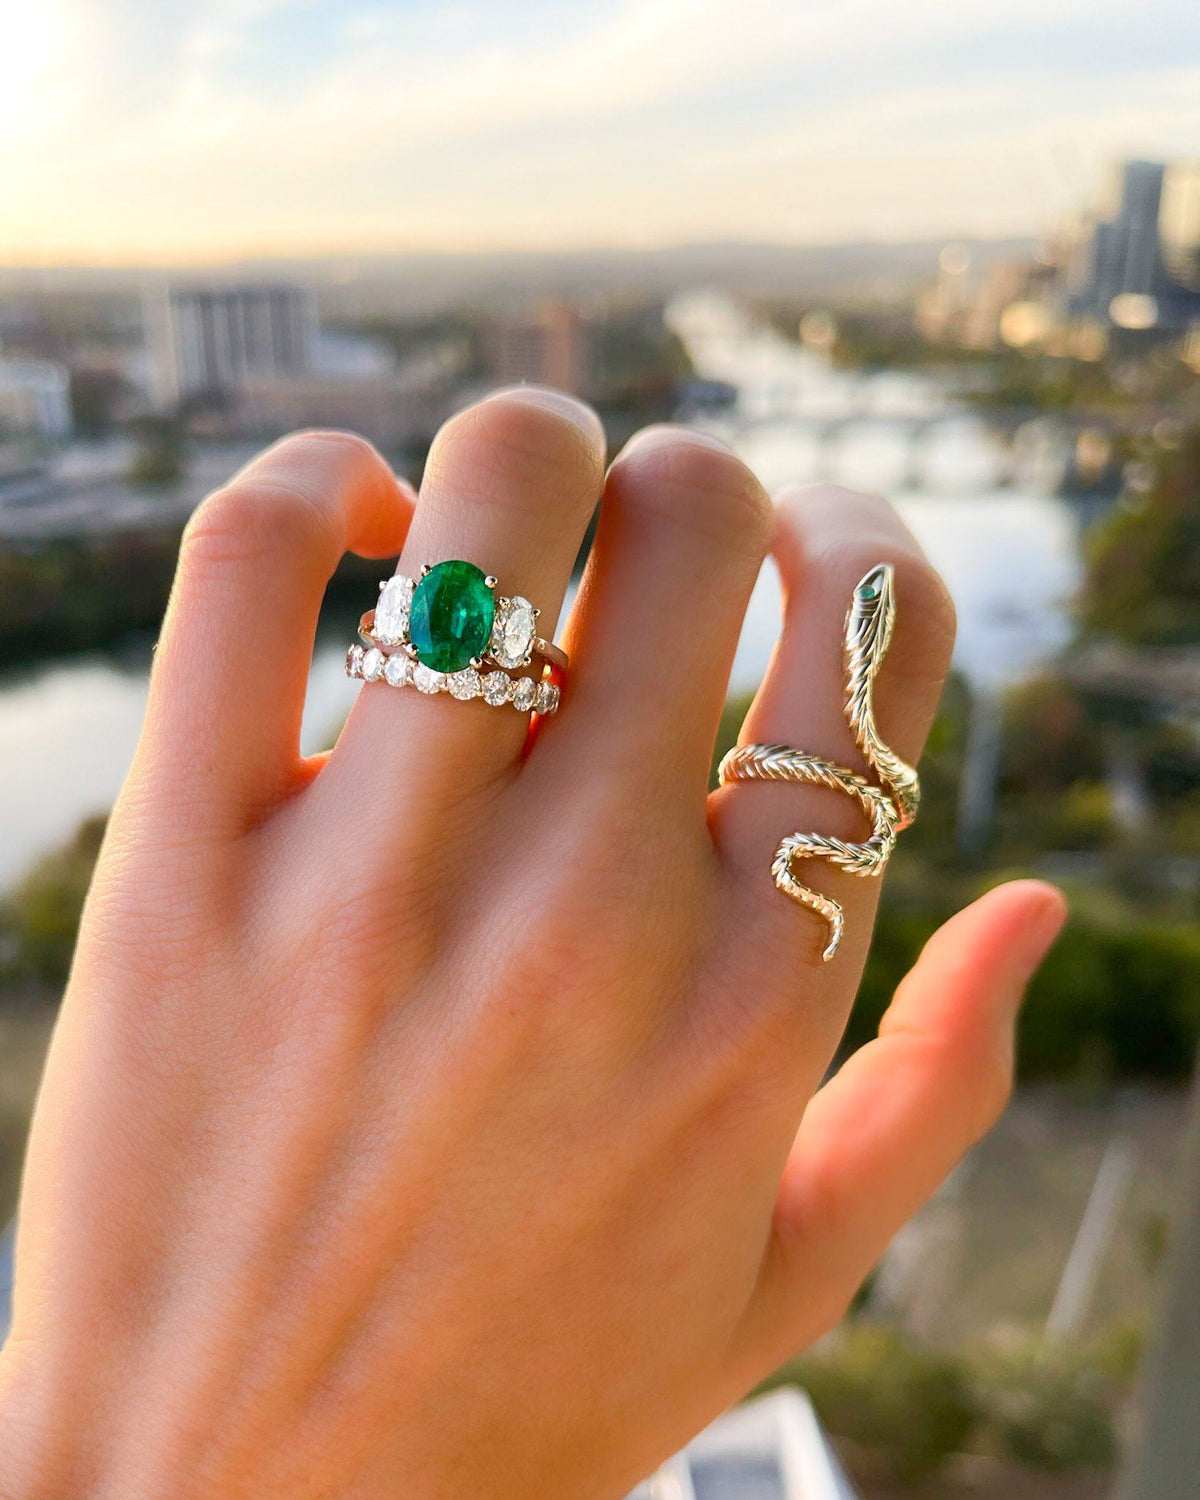 Highlight Triad Ring With Oval Green Emerald by Good Stone available in Gold and Platinum